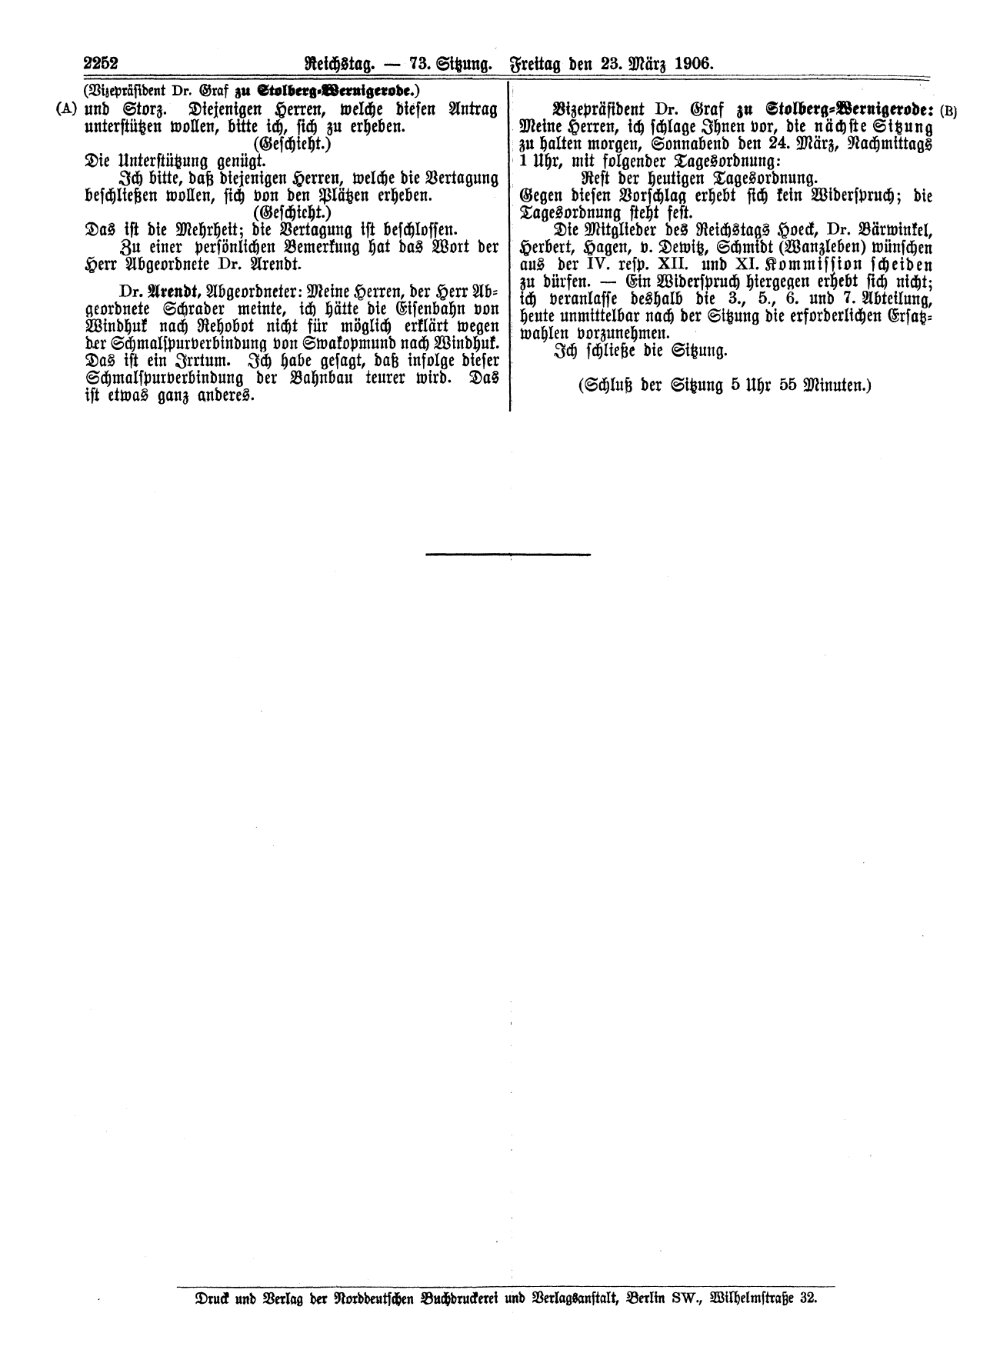 Scan of page 2252